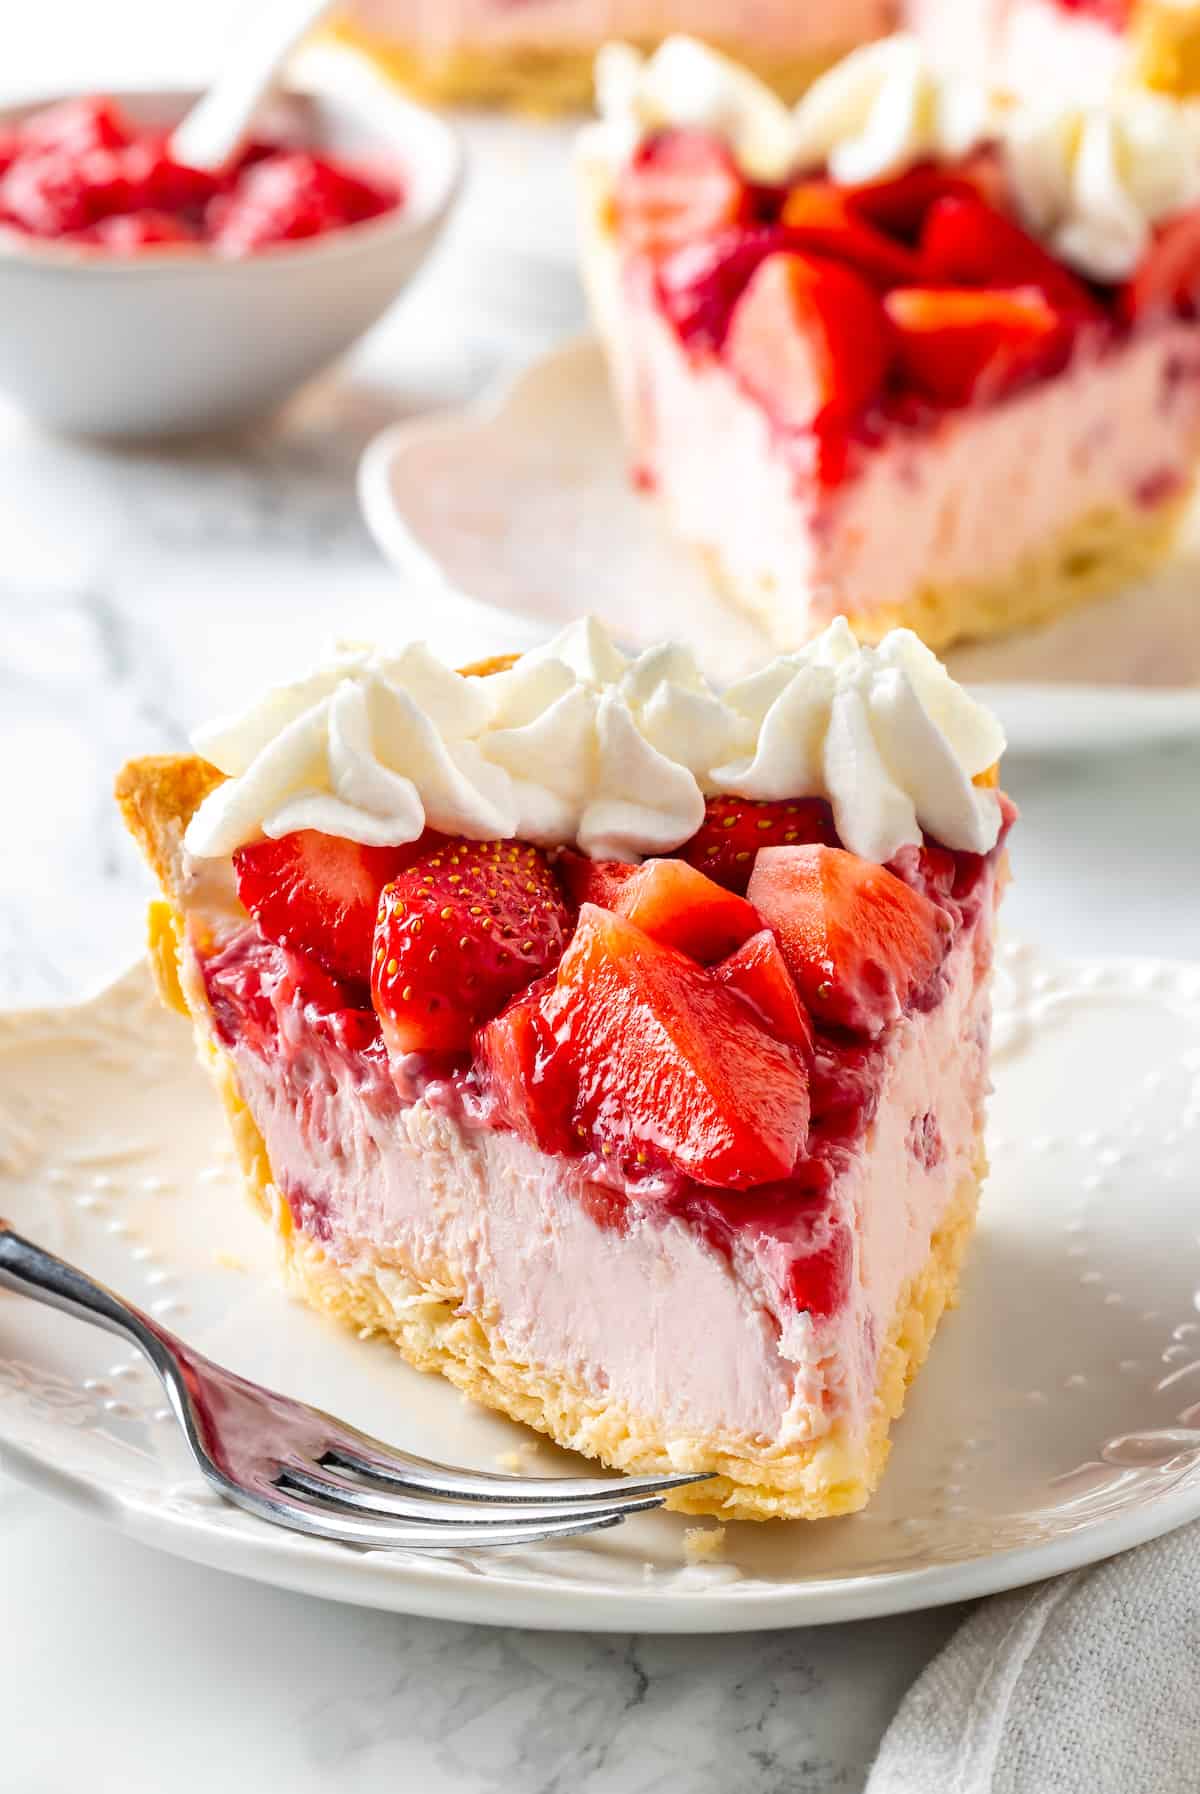 Slice of strawberry cream pie on plate with fork, with another slice of pie in background